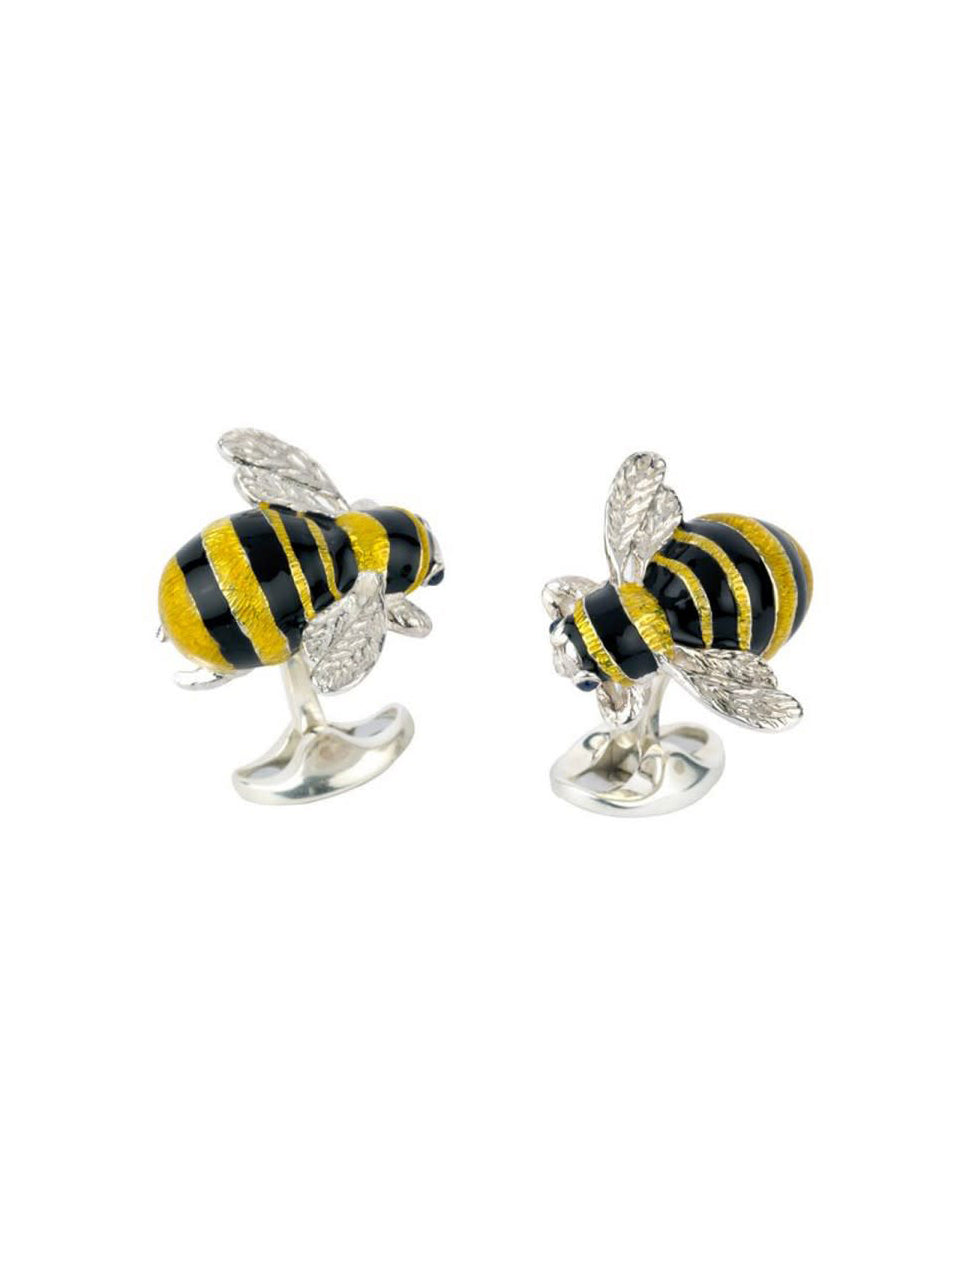 sterling silver cufflinks bumble bee 1